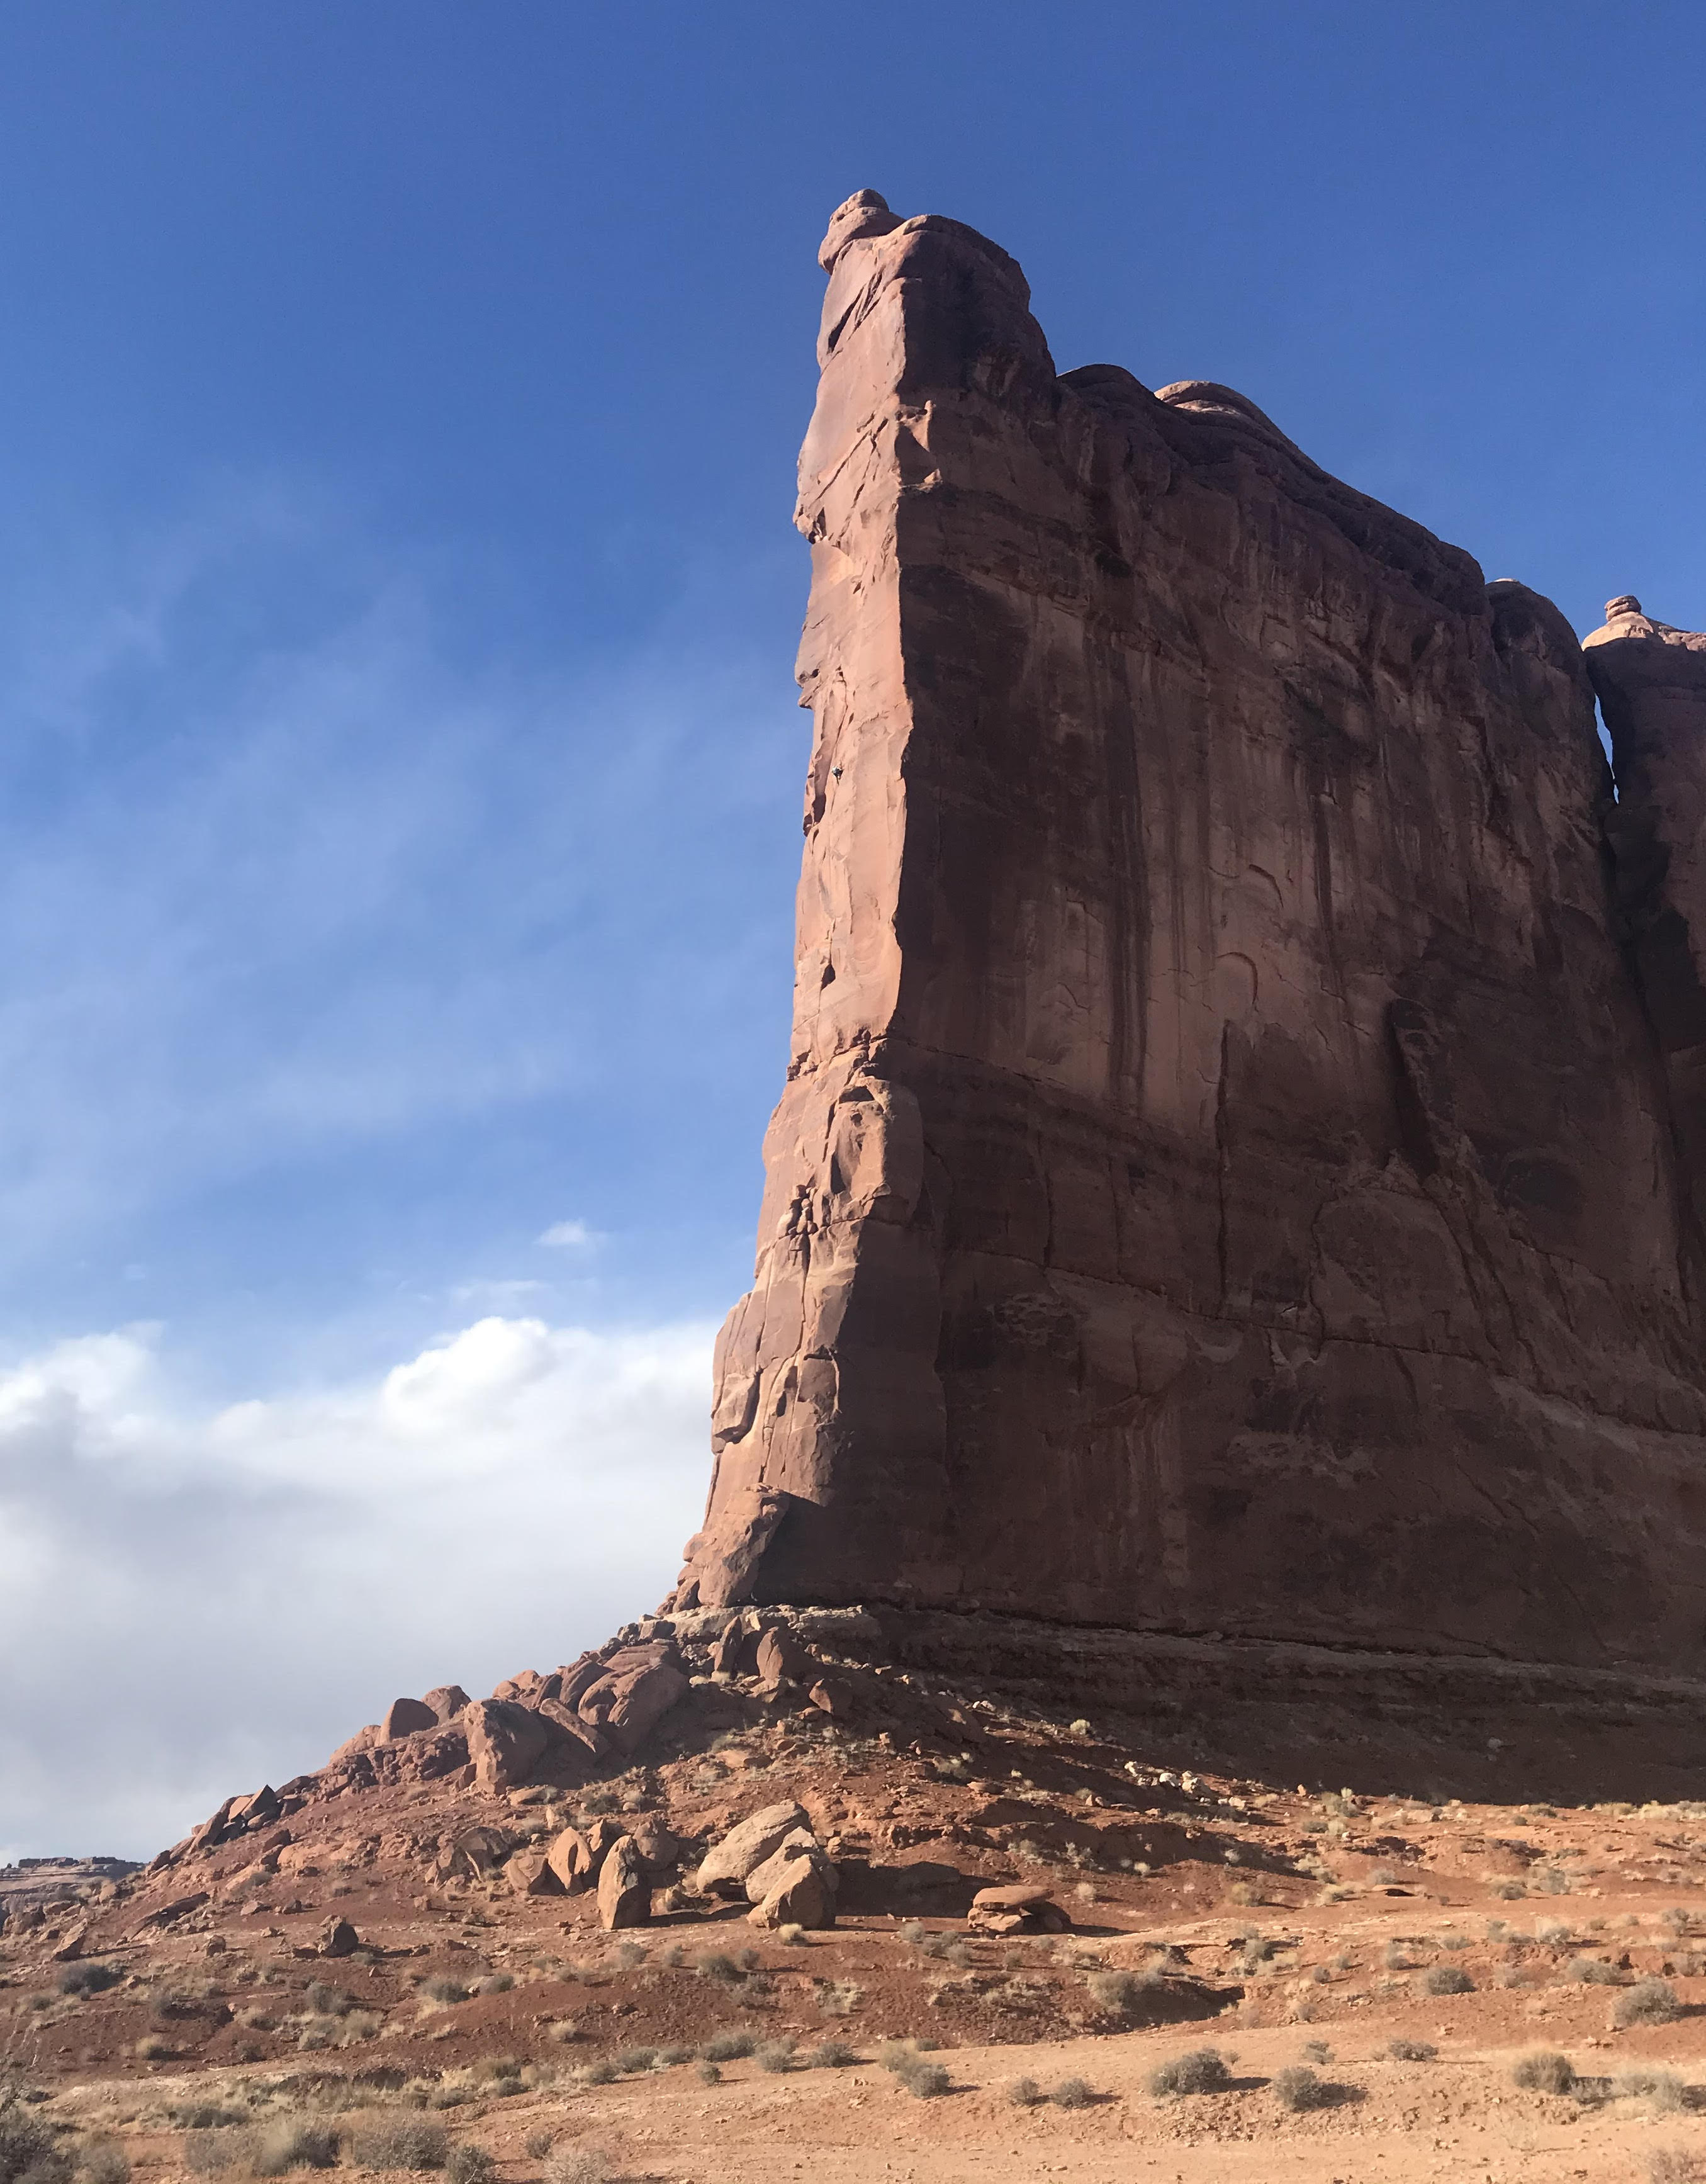 The author can be seen as a tiny dot in middle of the prow, halfway up the Tower of Babel in Arches National Park during his solo ascent of Zenyatta Entrada (5.8 C3-, 450') in February (Anasazi, Hopi, Navajo, Ouray, Paiute, Uintah, Ute, Zuni land). [Photo] Mikenna Clokey